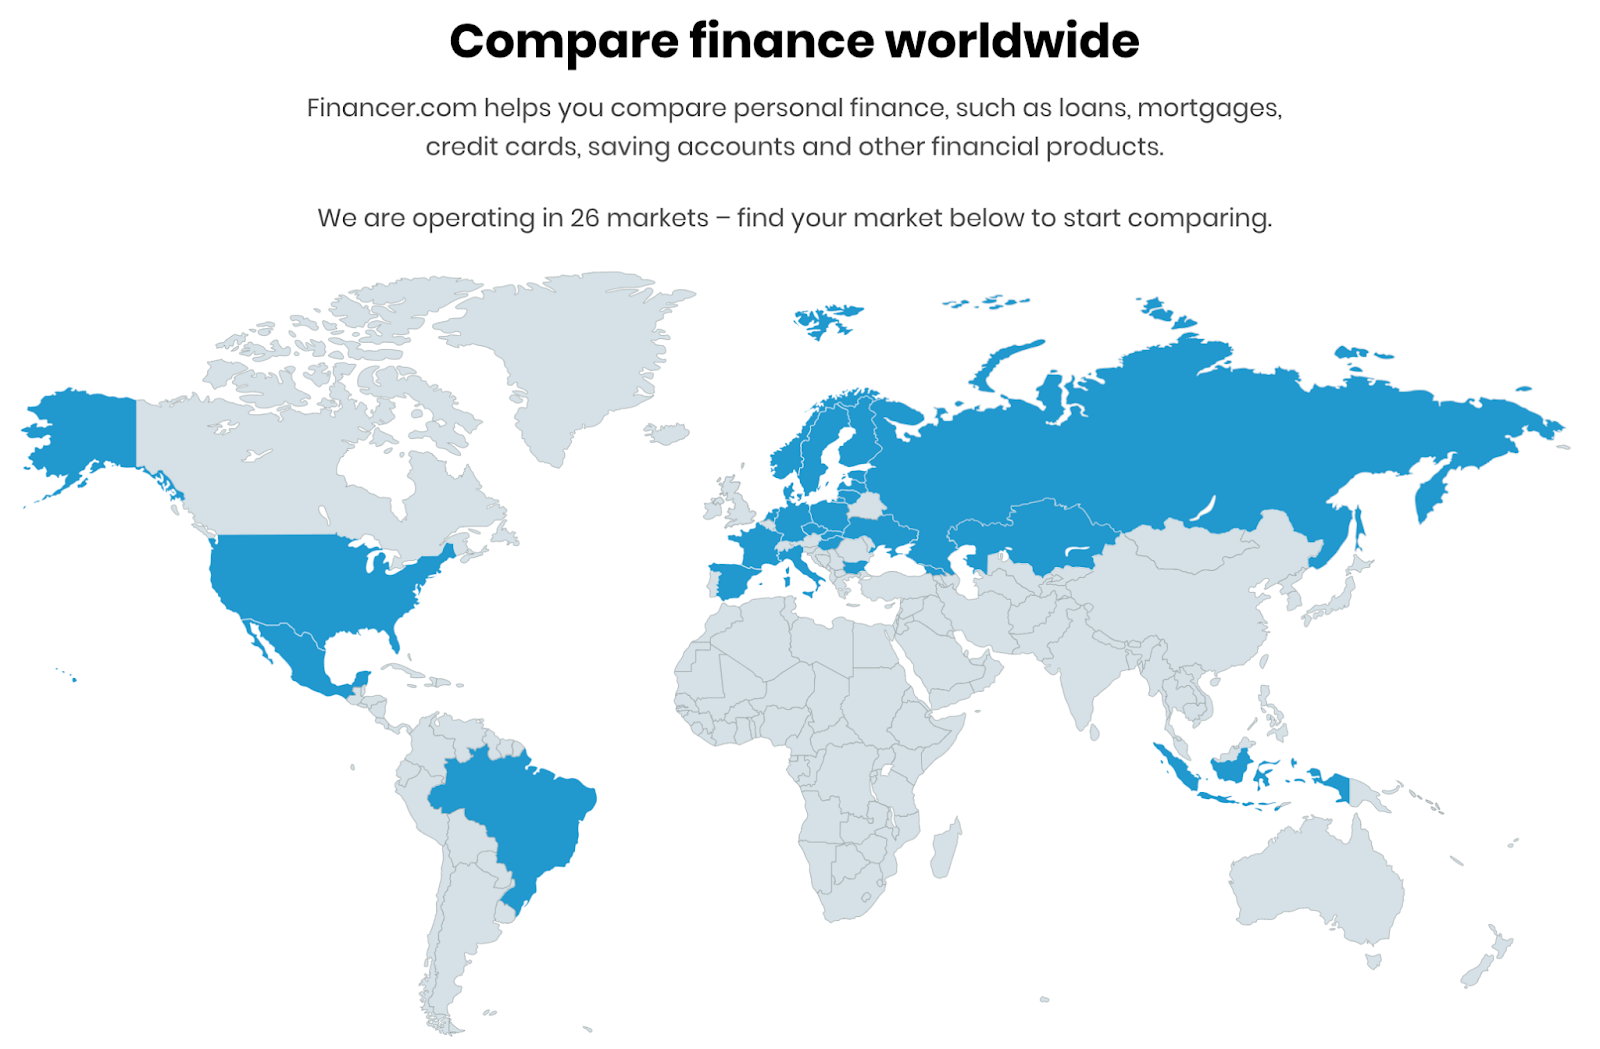 world map showing countries where financer.com operates